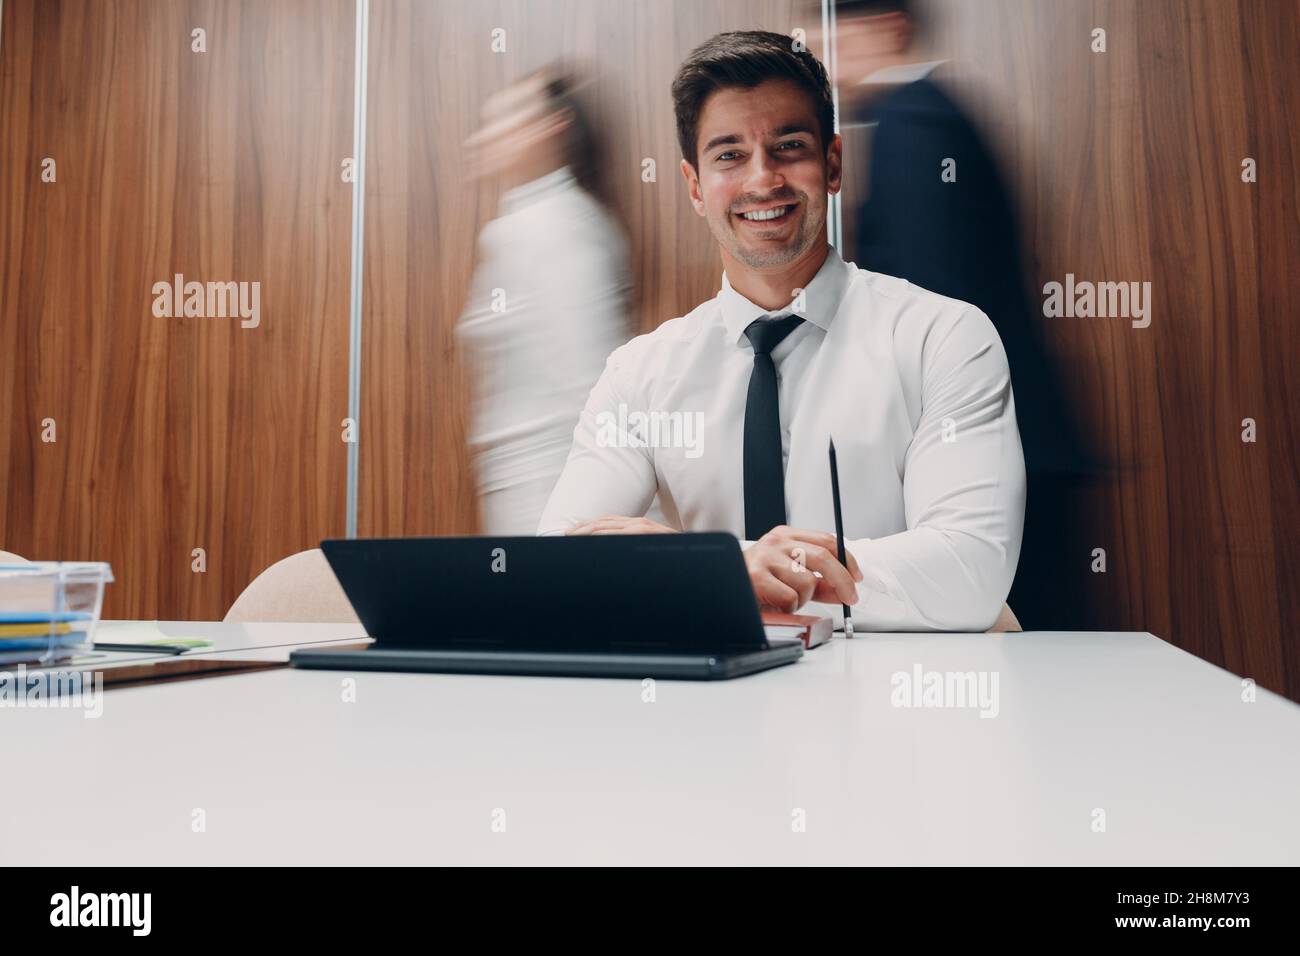 Businessman using laptop sit at table in office meeting background with walking people with motion blur. Business people man and woman group conference discussion. Stock Photo